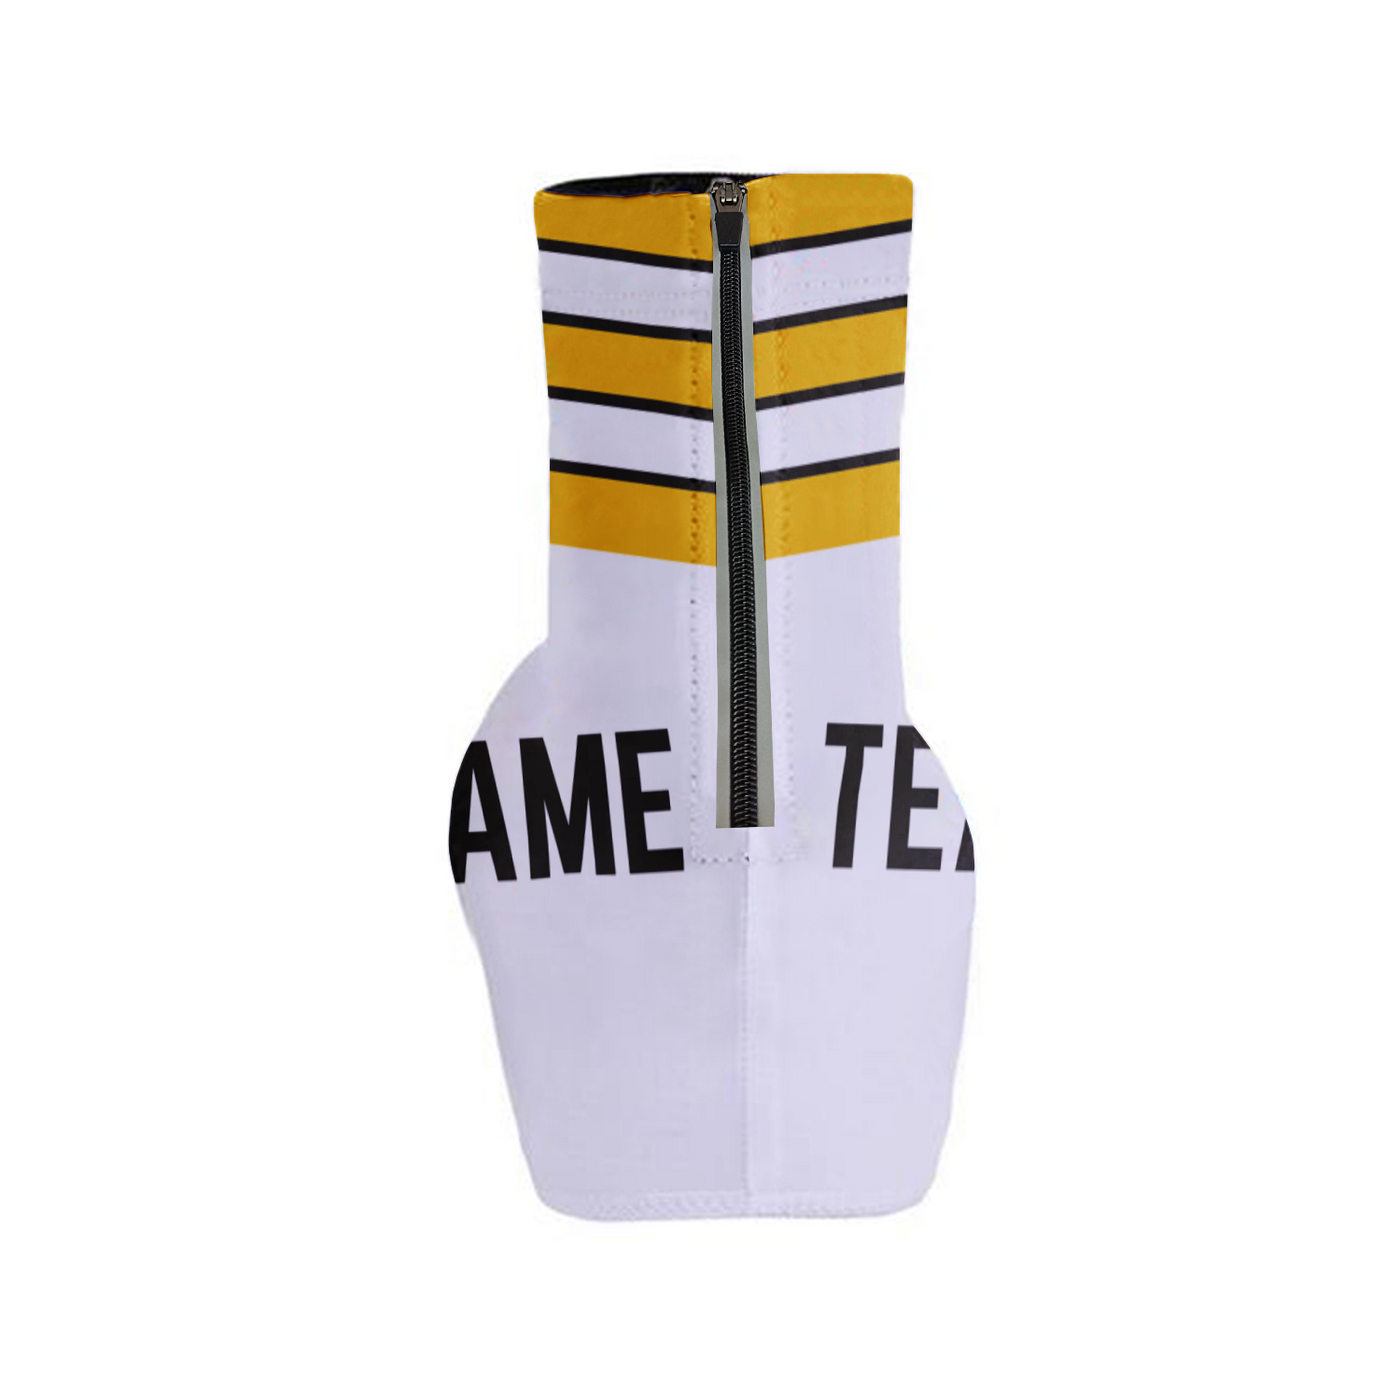 Customized Pittsburgh Team Cycling Shoe Covers